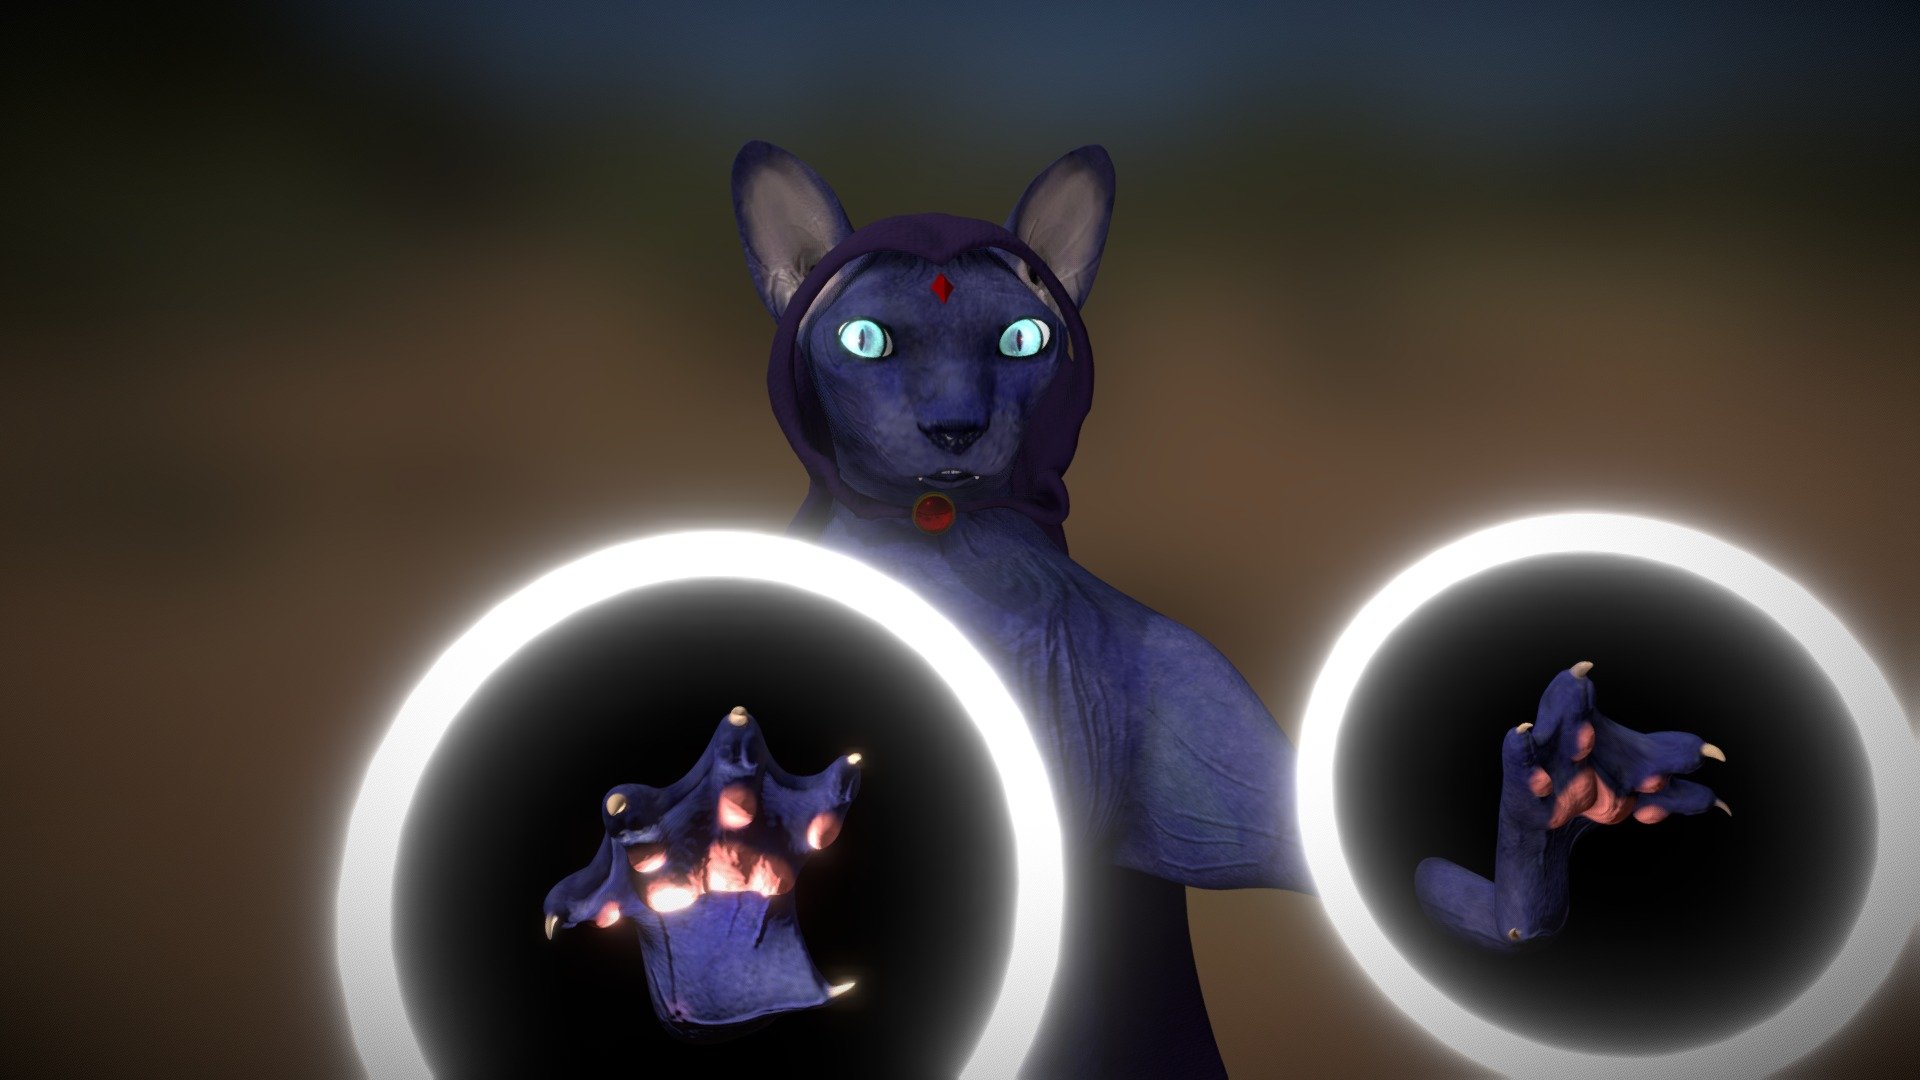 I just love Raven. The fact is that I was thinking of a raven Raven but I also love Sphynx so I combined the two, after all, a cat is fine too.
Btw, the paws of the Sphynx looks like hands, that's not my idea, they look like this for real and I must admit that it amazes me 3d model